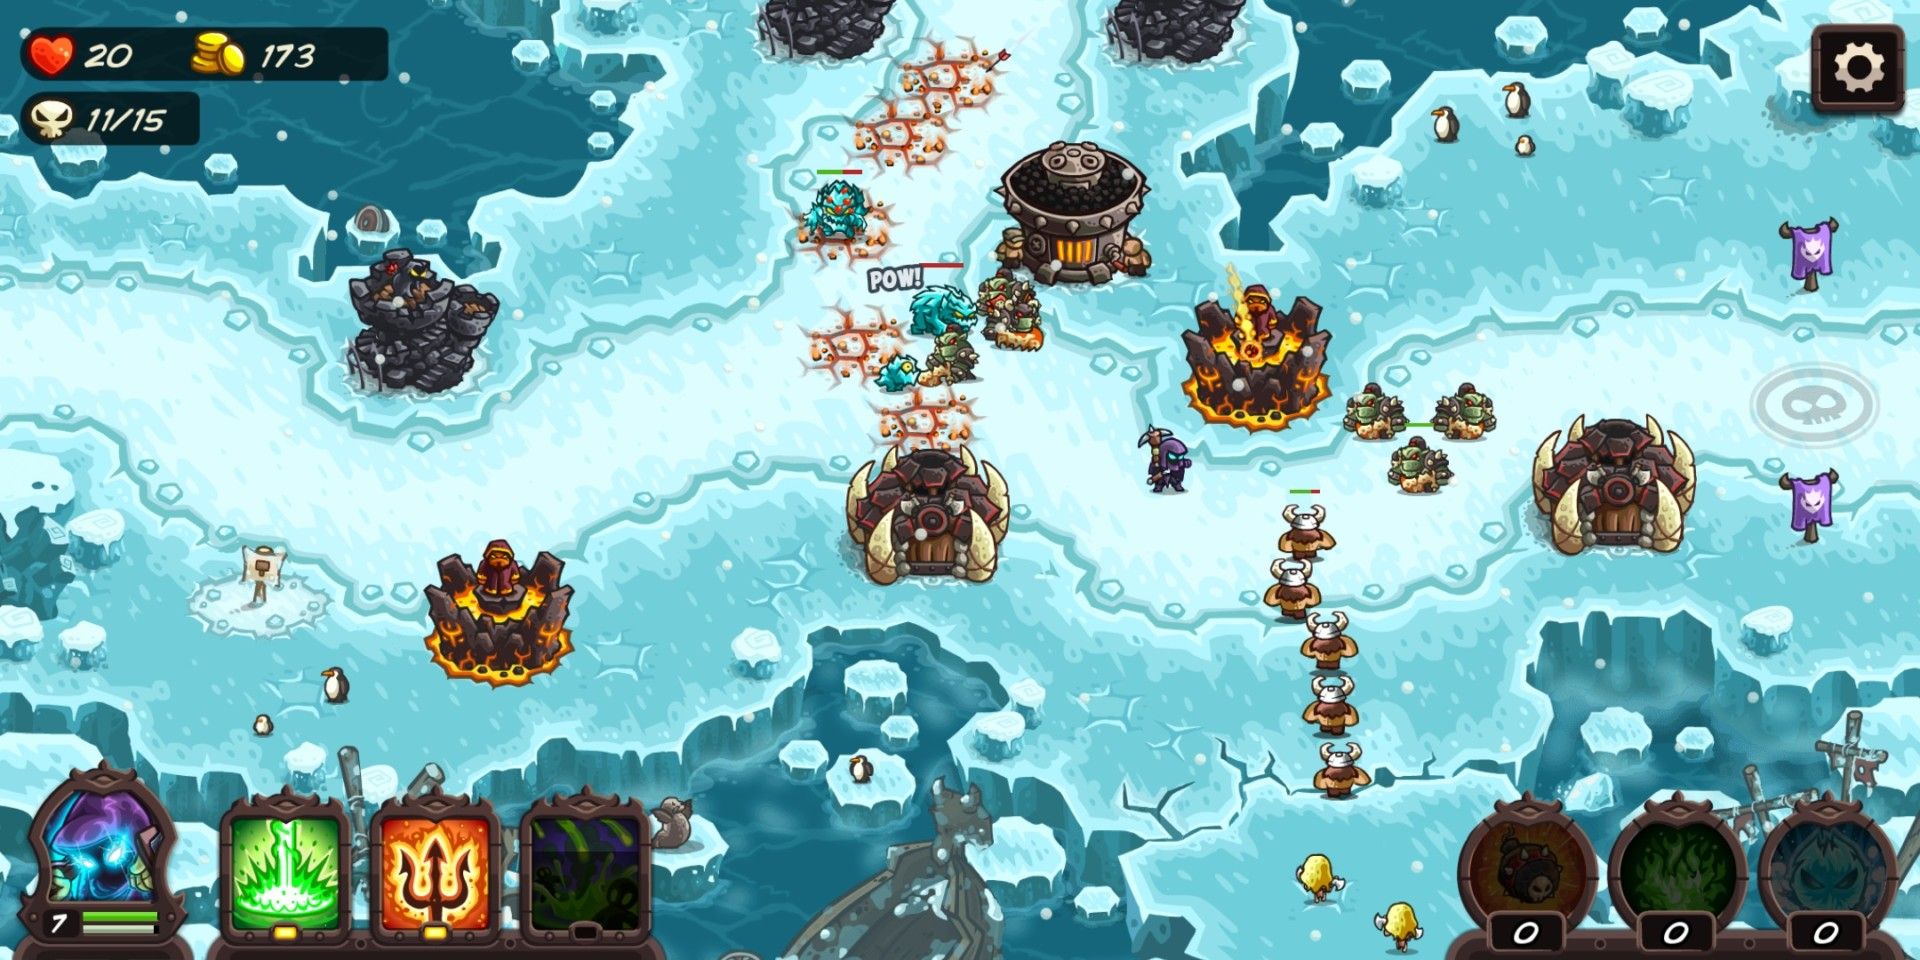 Best tower defense games you can play right now